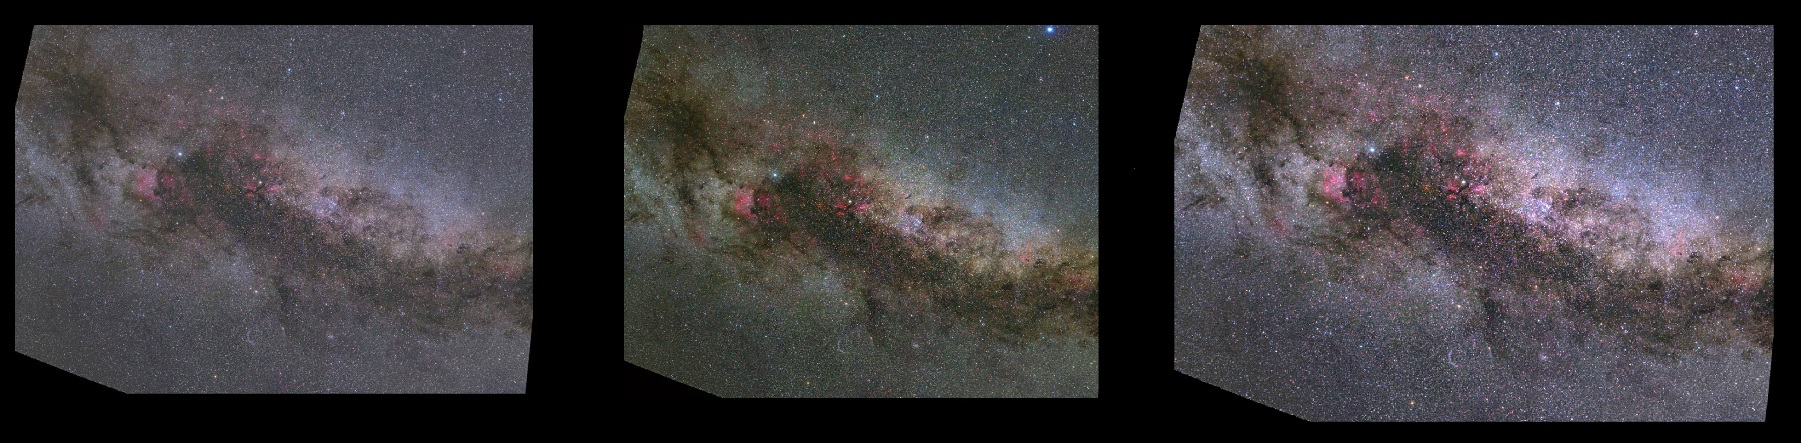 Milky Way in Cygnus and Lyra constellations elaborated by Marco Candotti (left), Rolando Ligustri (center) and Matteo Mellone (right): 348 KB; click on the image to enlarge